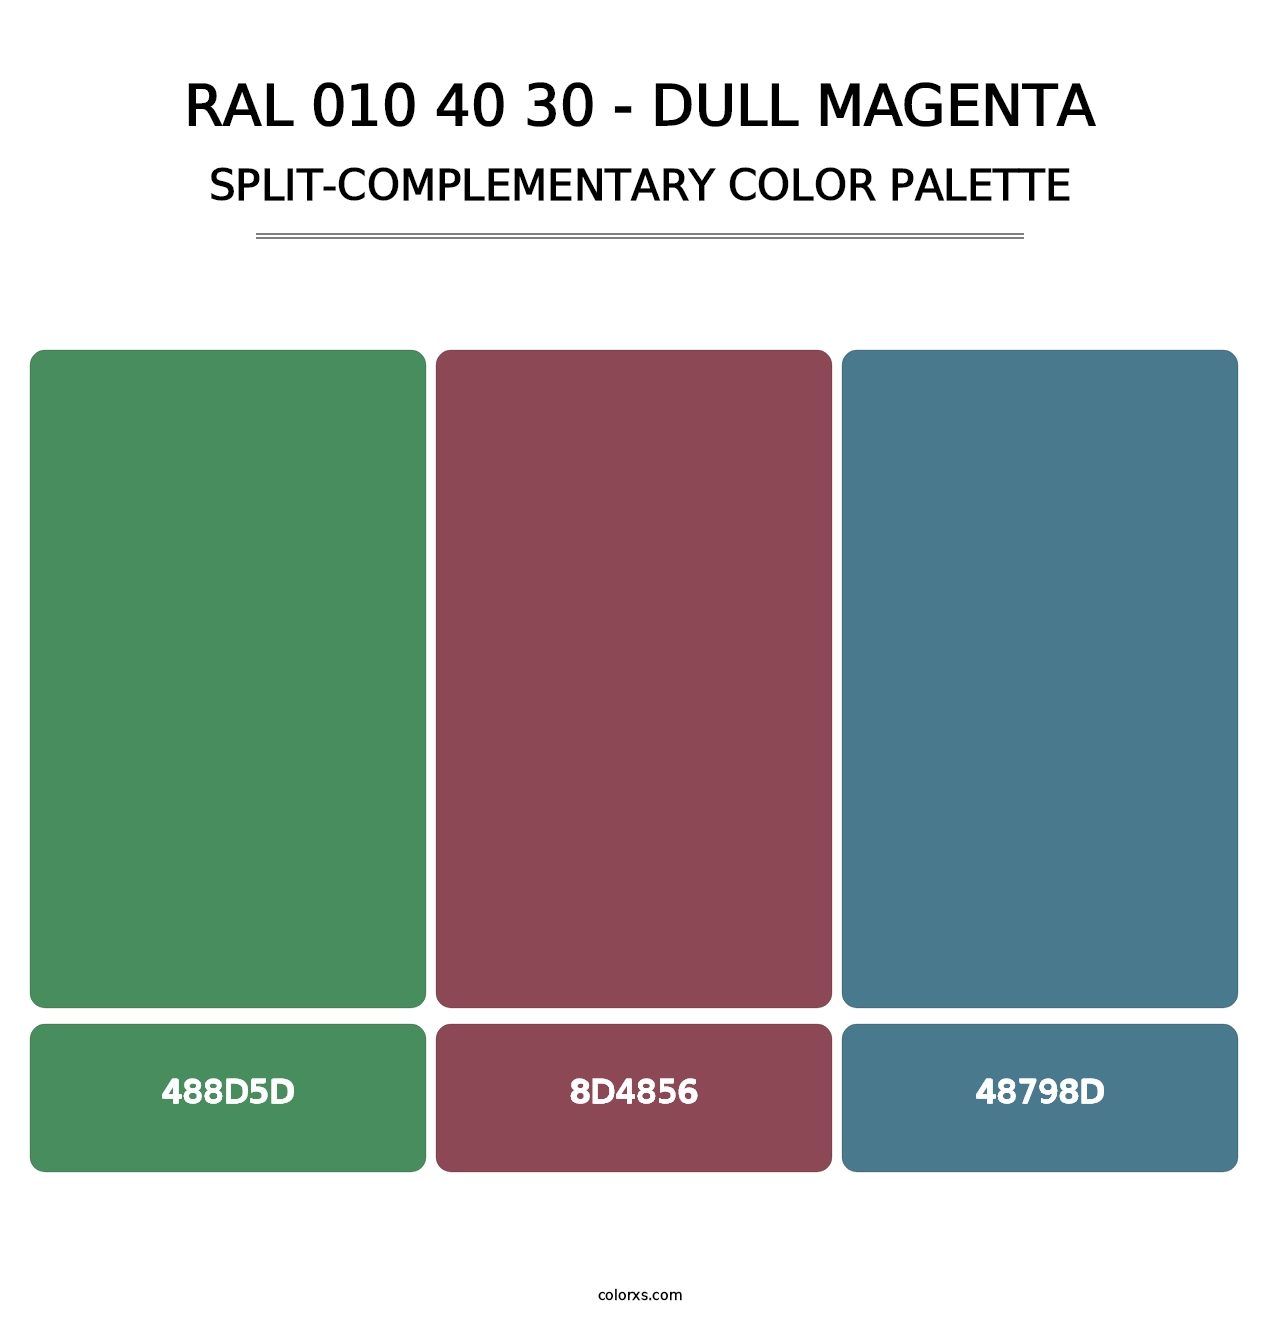 RAL 010 40 30 - Dull Magenta - Split-Complementary Color Palette